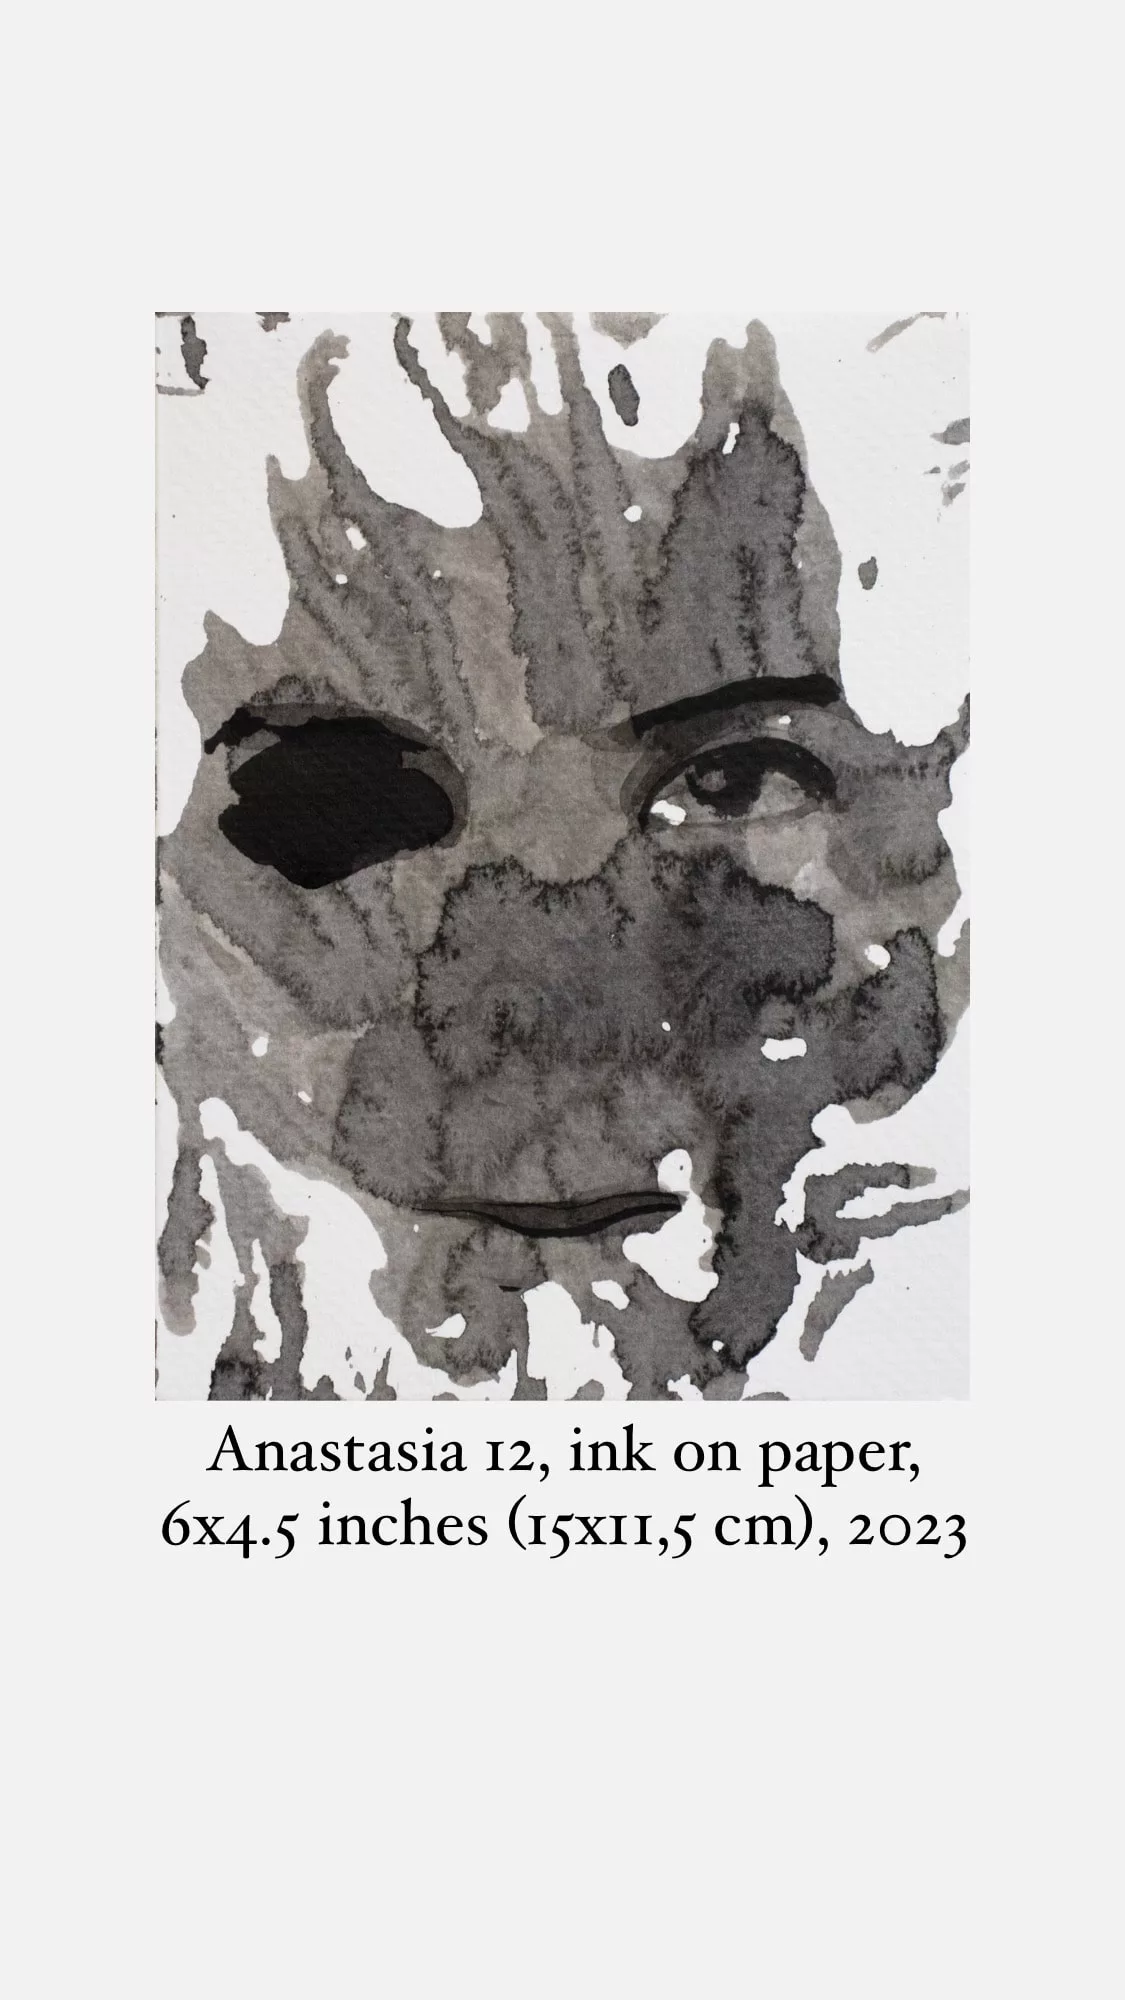 Anastasia 12, A Delicate Ink Portrait of the Human Form 4